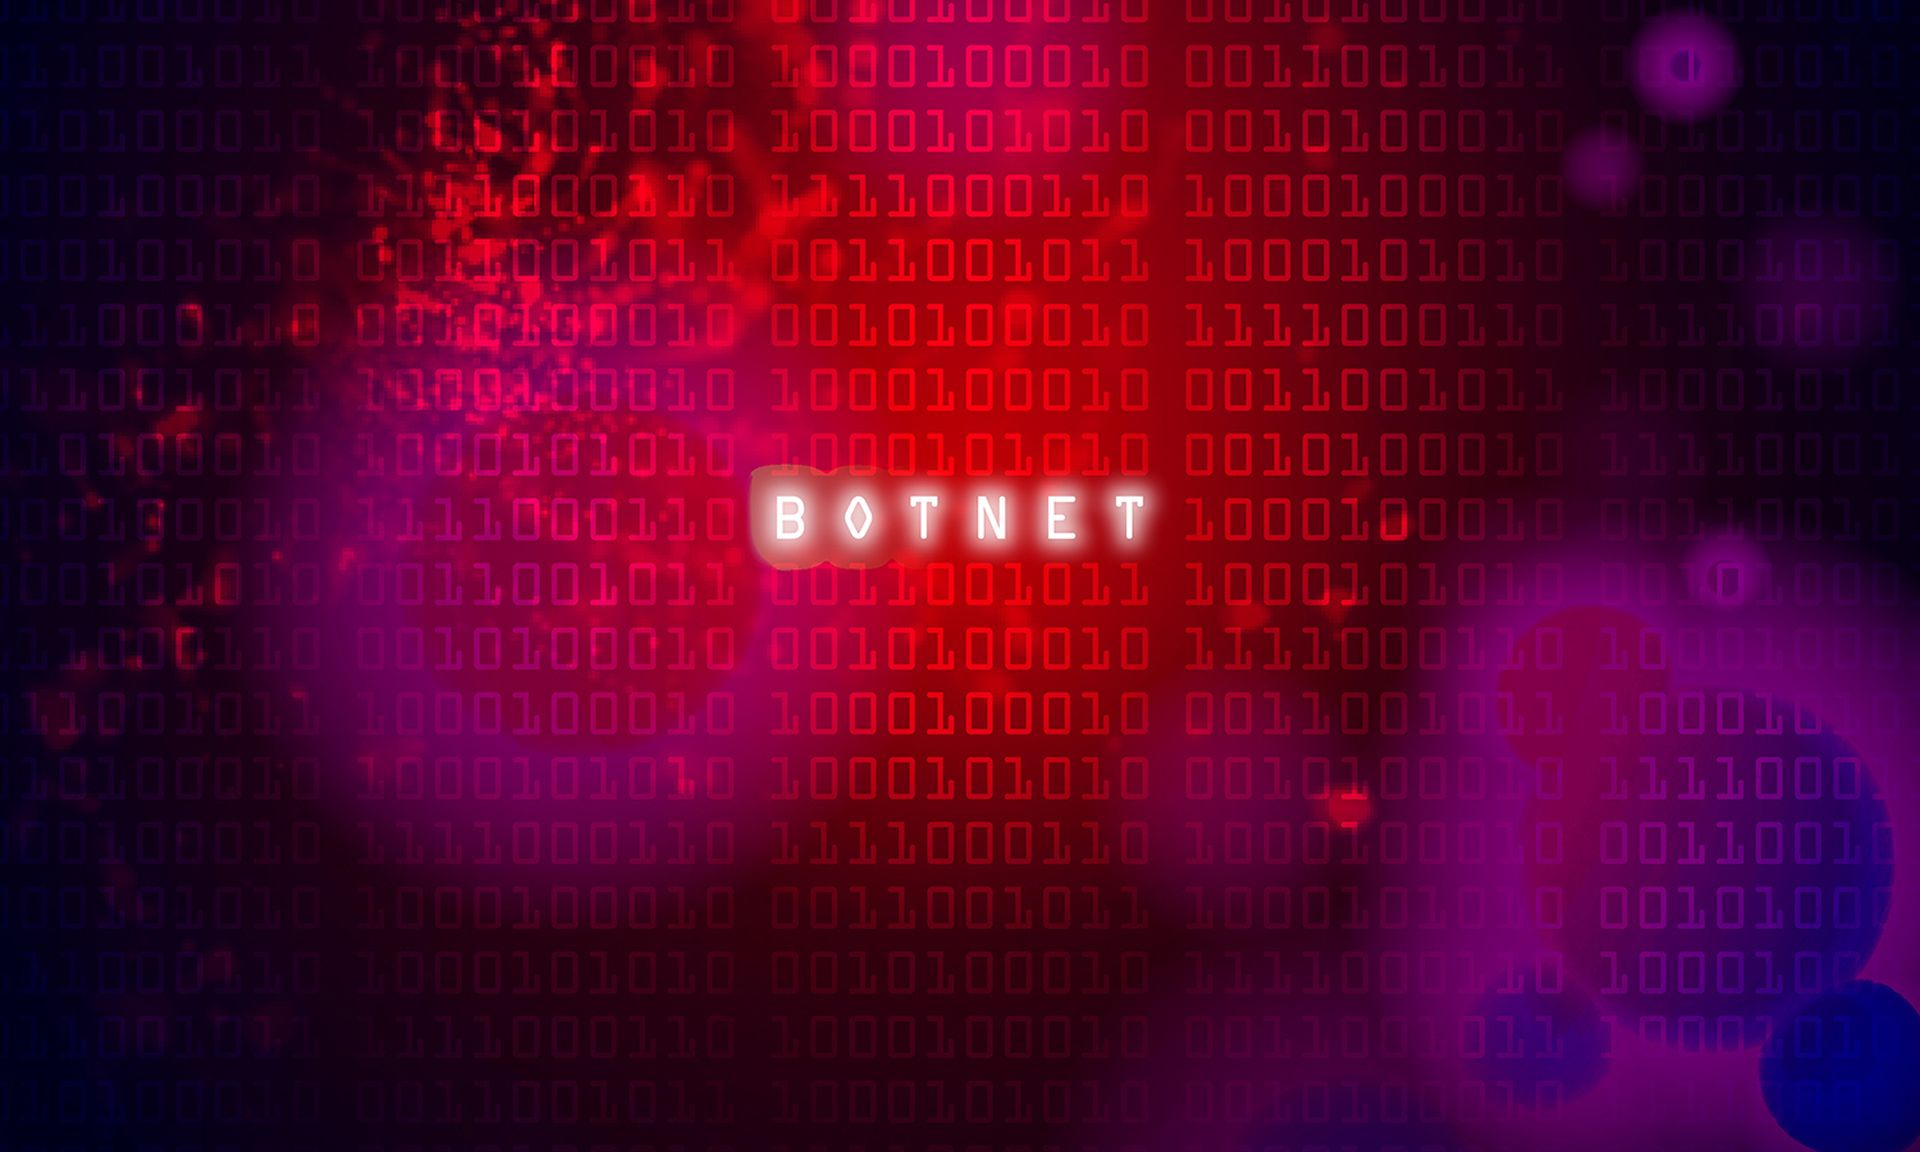 The word "botnet" is seen over a background of 1s and 0s.